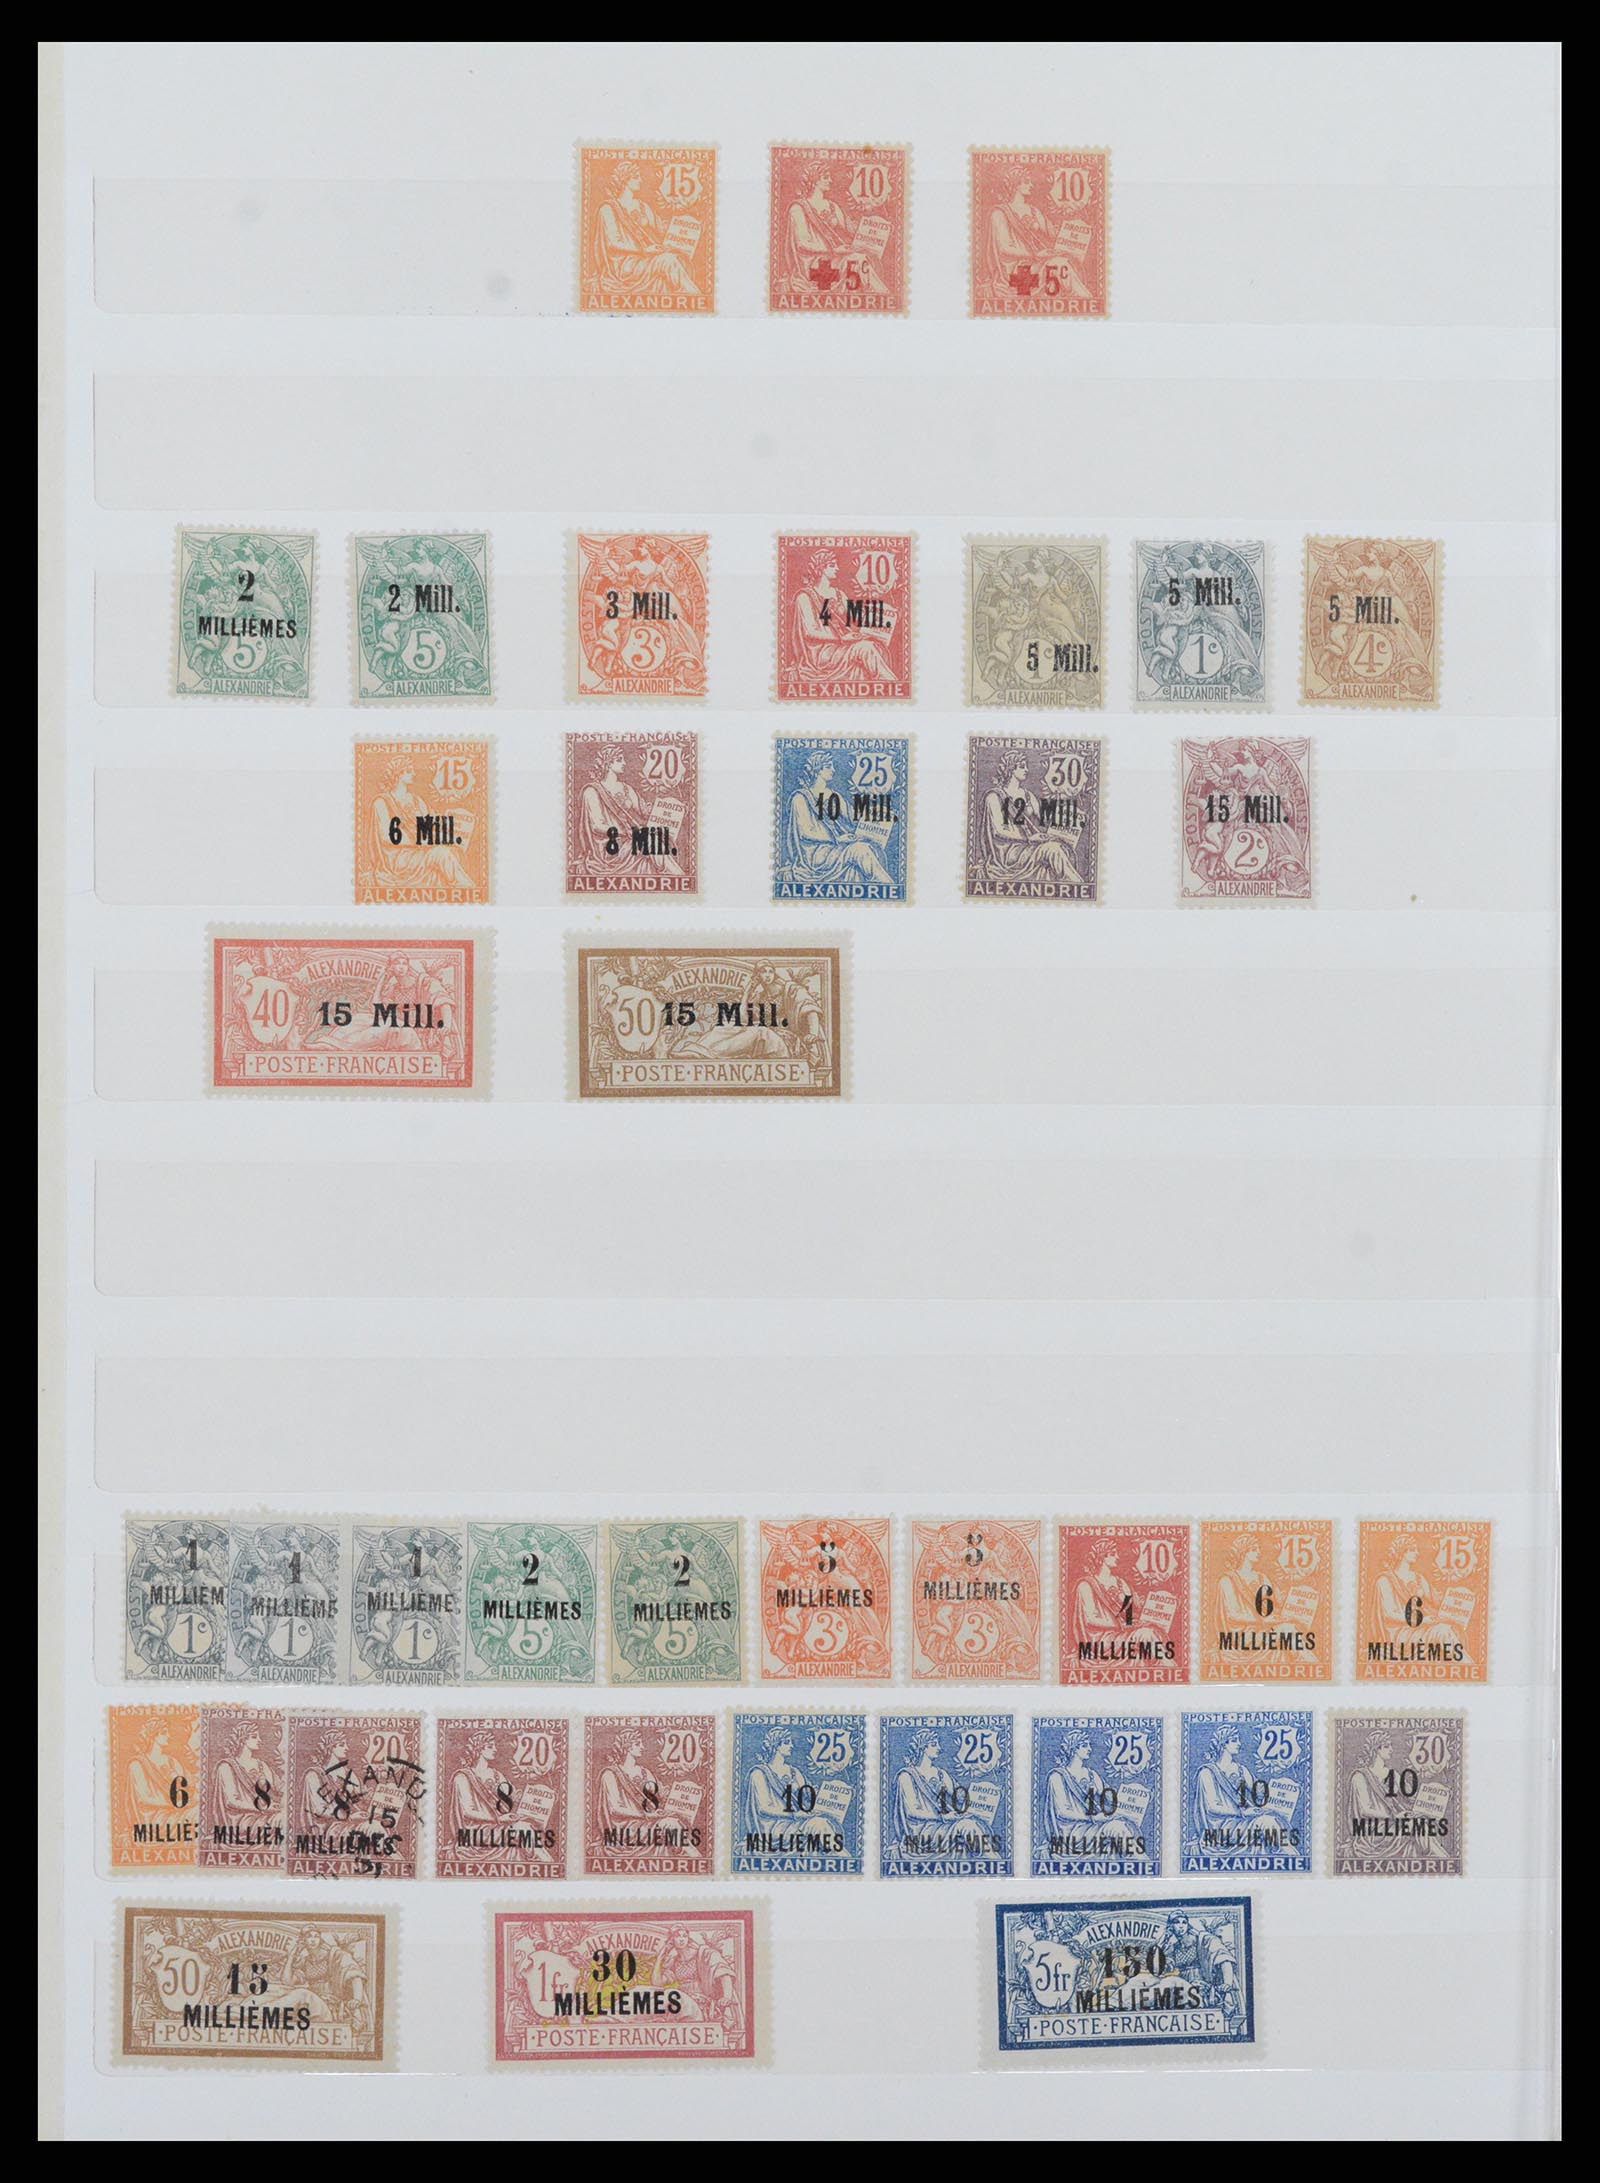 37523 002 - Stamp collection 37523 Offices abroad of France 1899-1930.